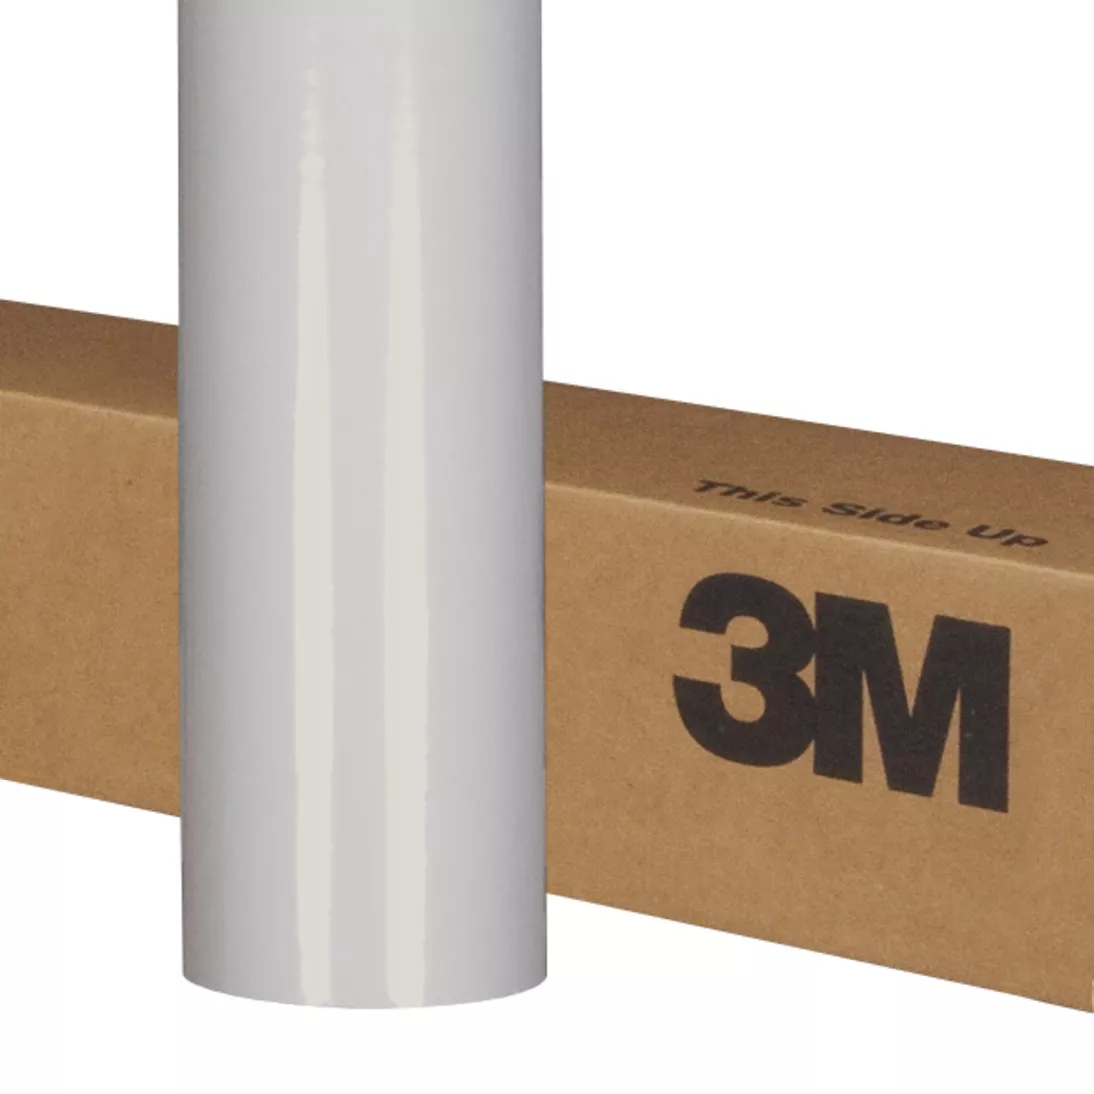 3M™ Scotchcal™ ElectroCut™ Graphic Film 7125-11, Pearl Gray, 48 in x 50
yd